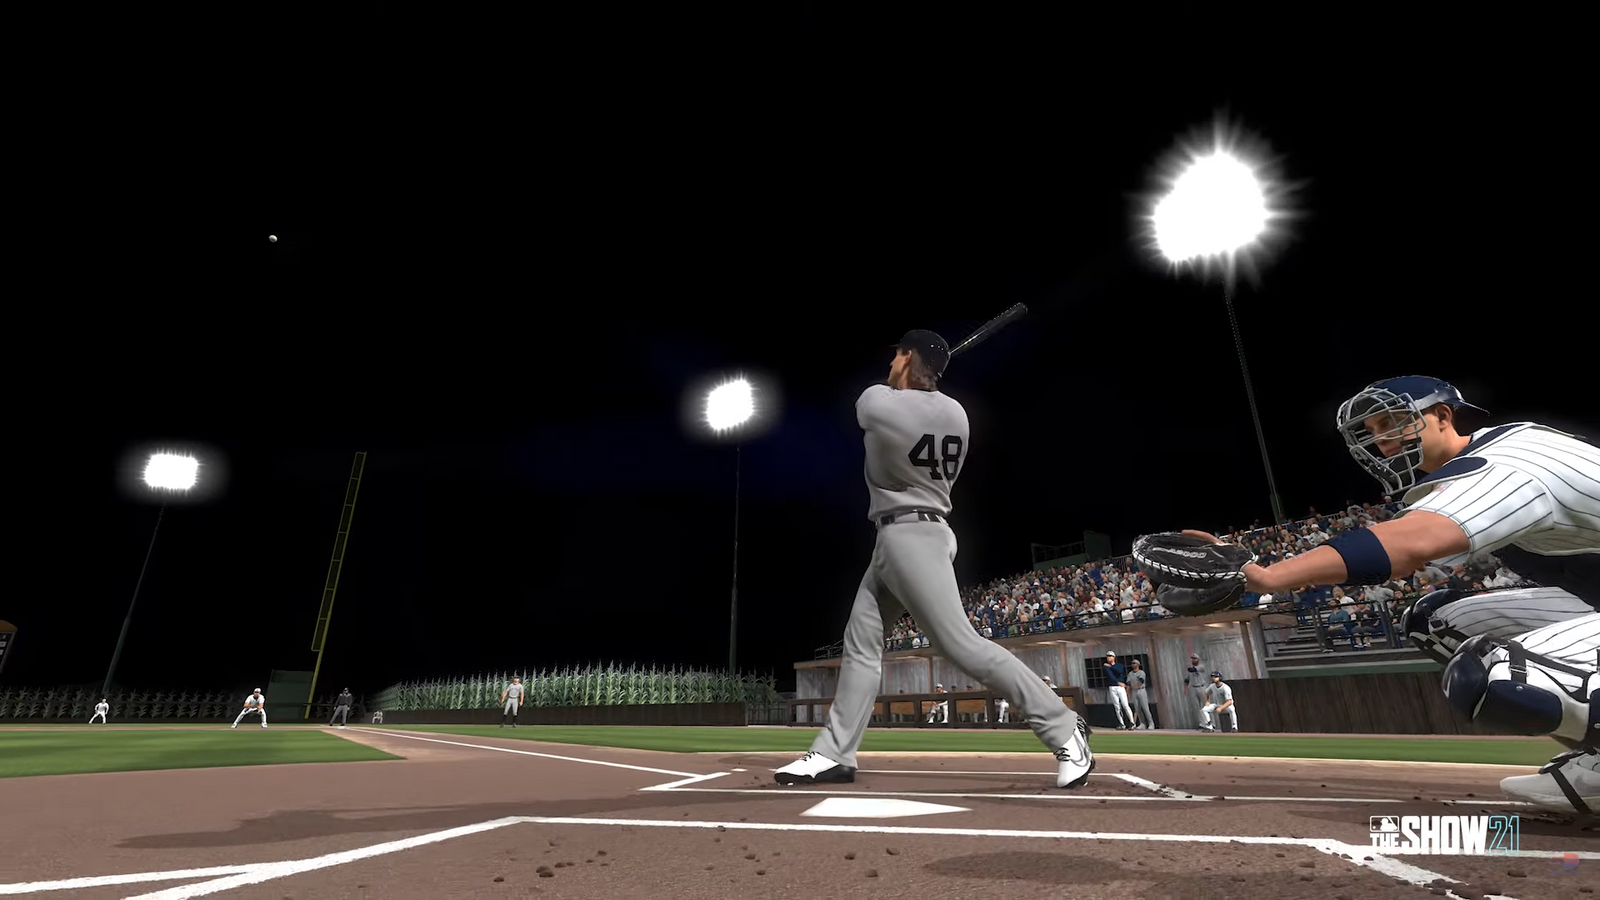 MLB The Show 21 Field of Dreams